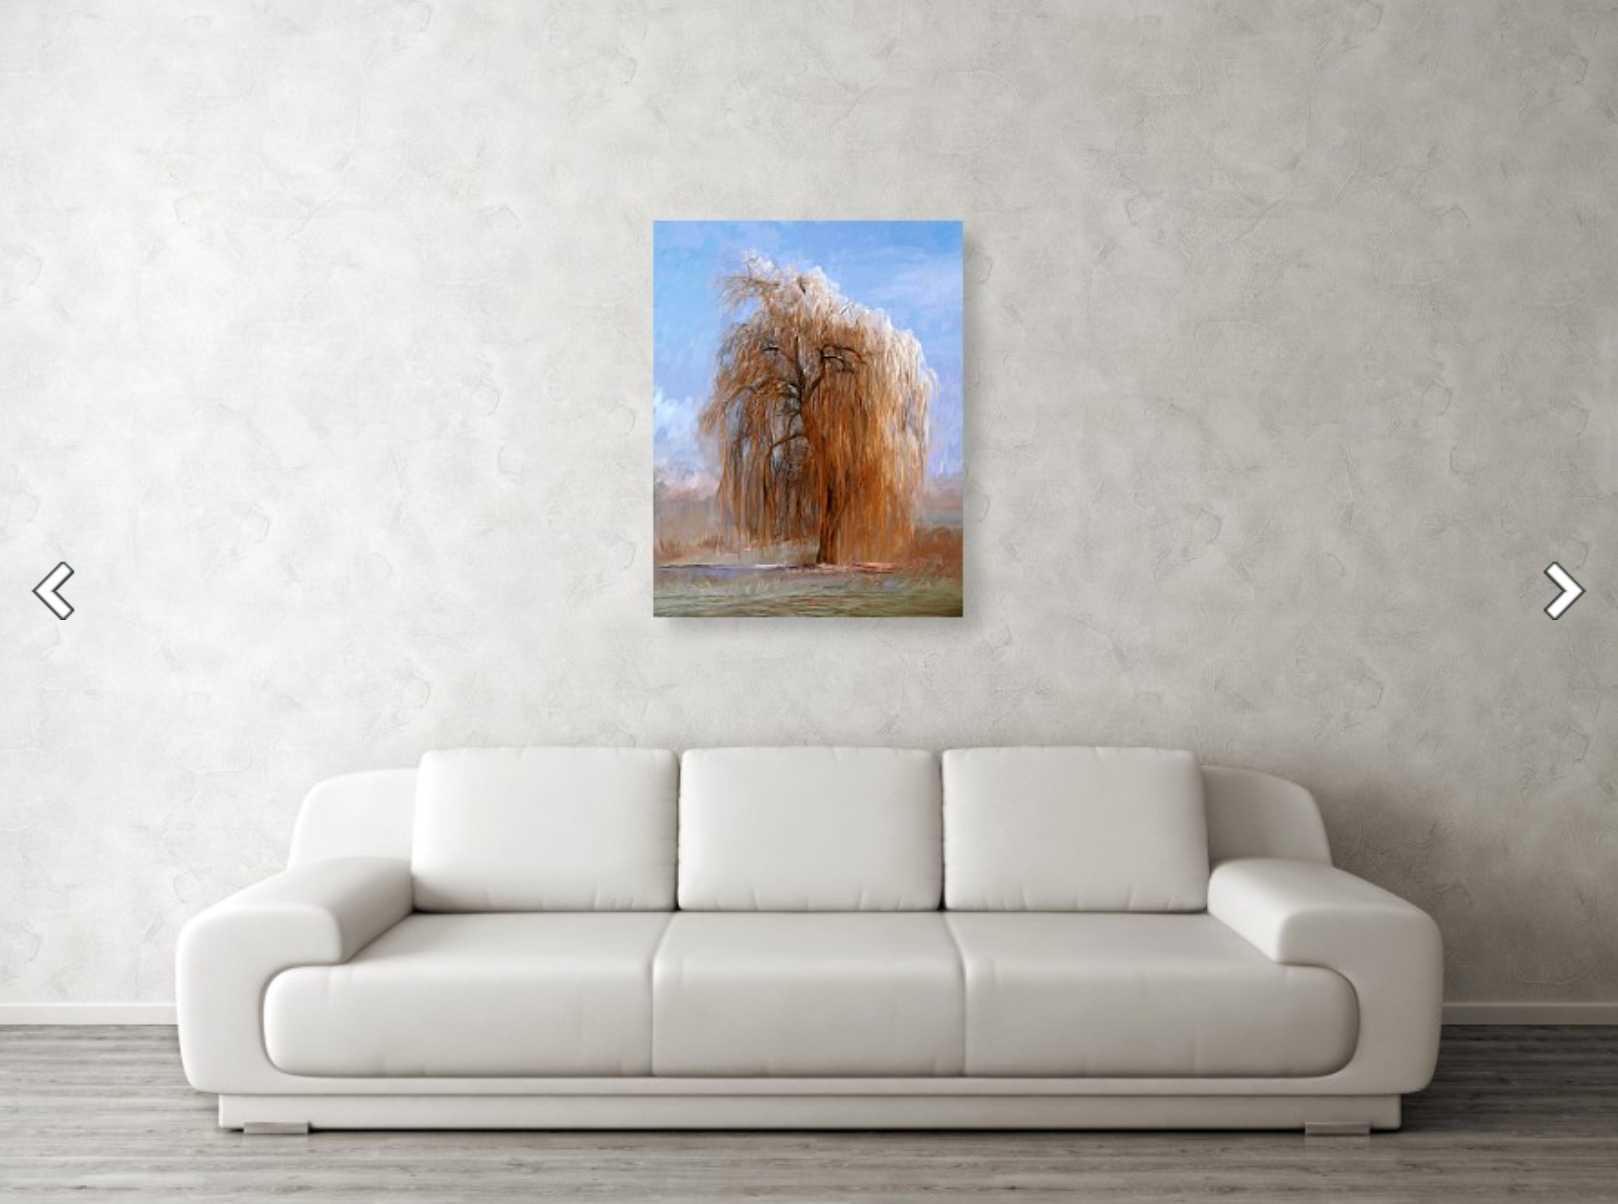 Stretched Canvas Print - The Lone Willow Tree - Landscape Print over sofa